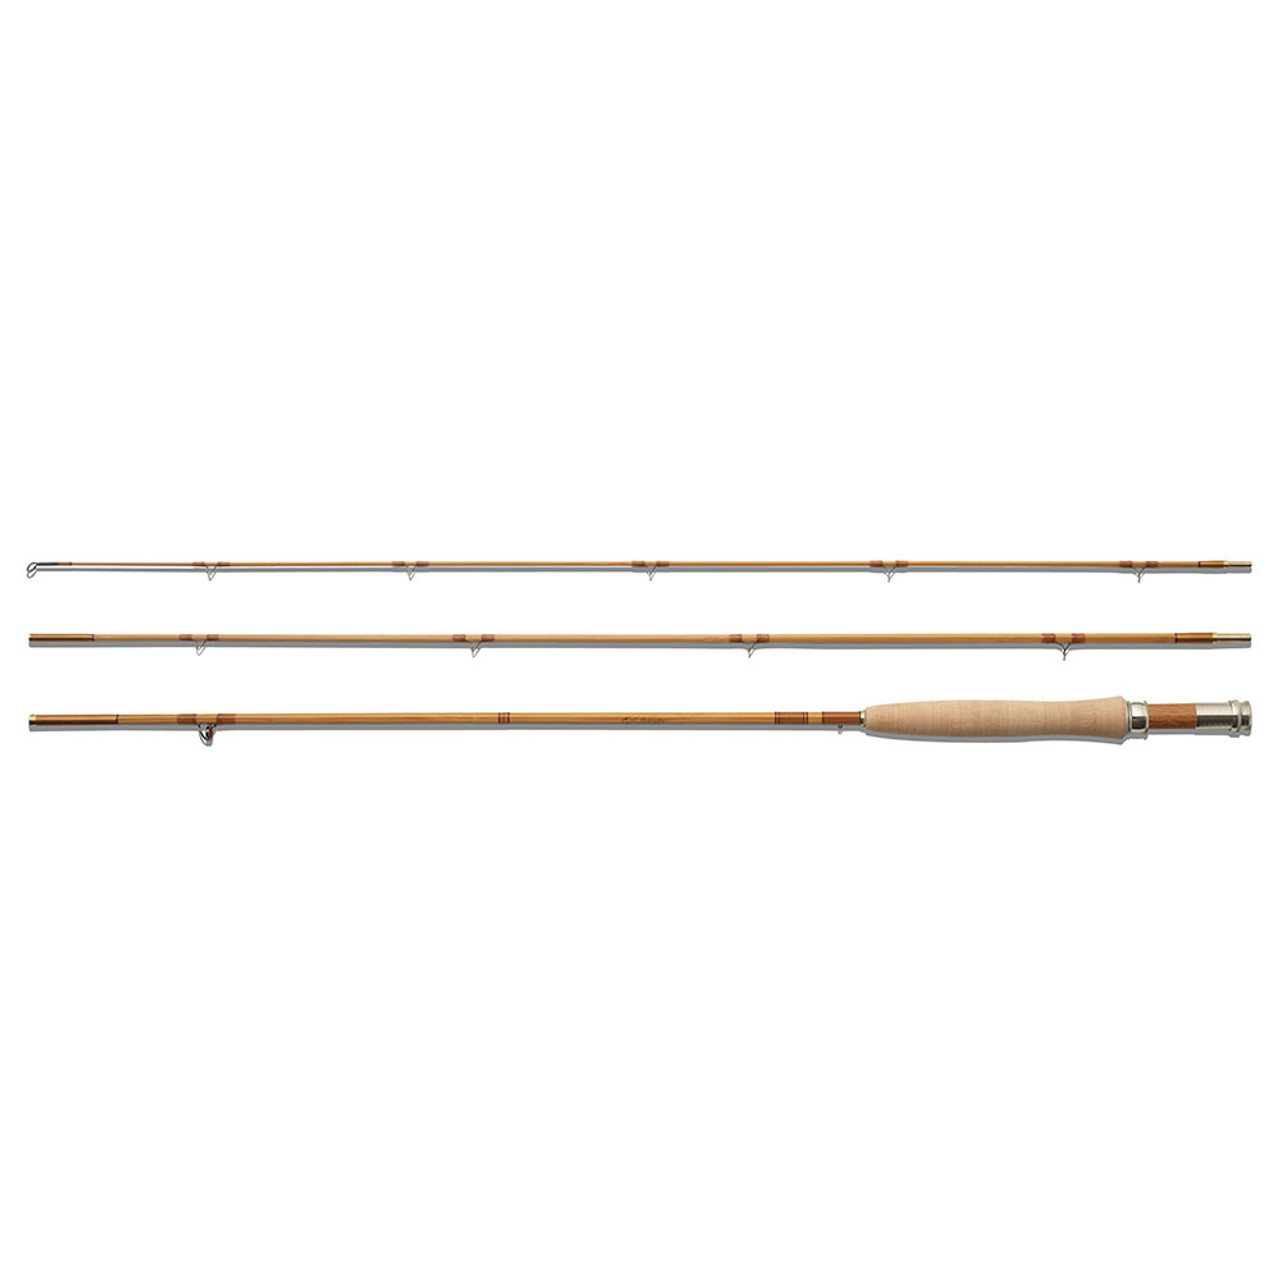 Winston Bamboo Rod 3wt 7' 3 Piece31891 - Gordy & Sons Outfitters